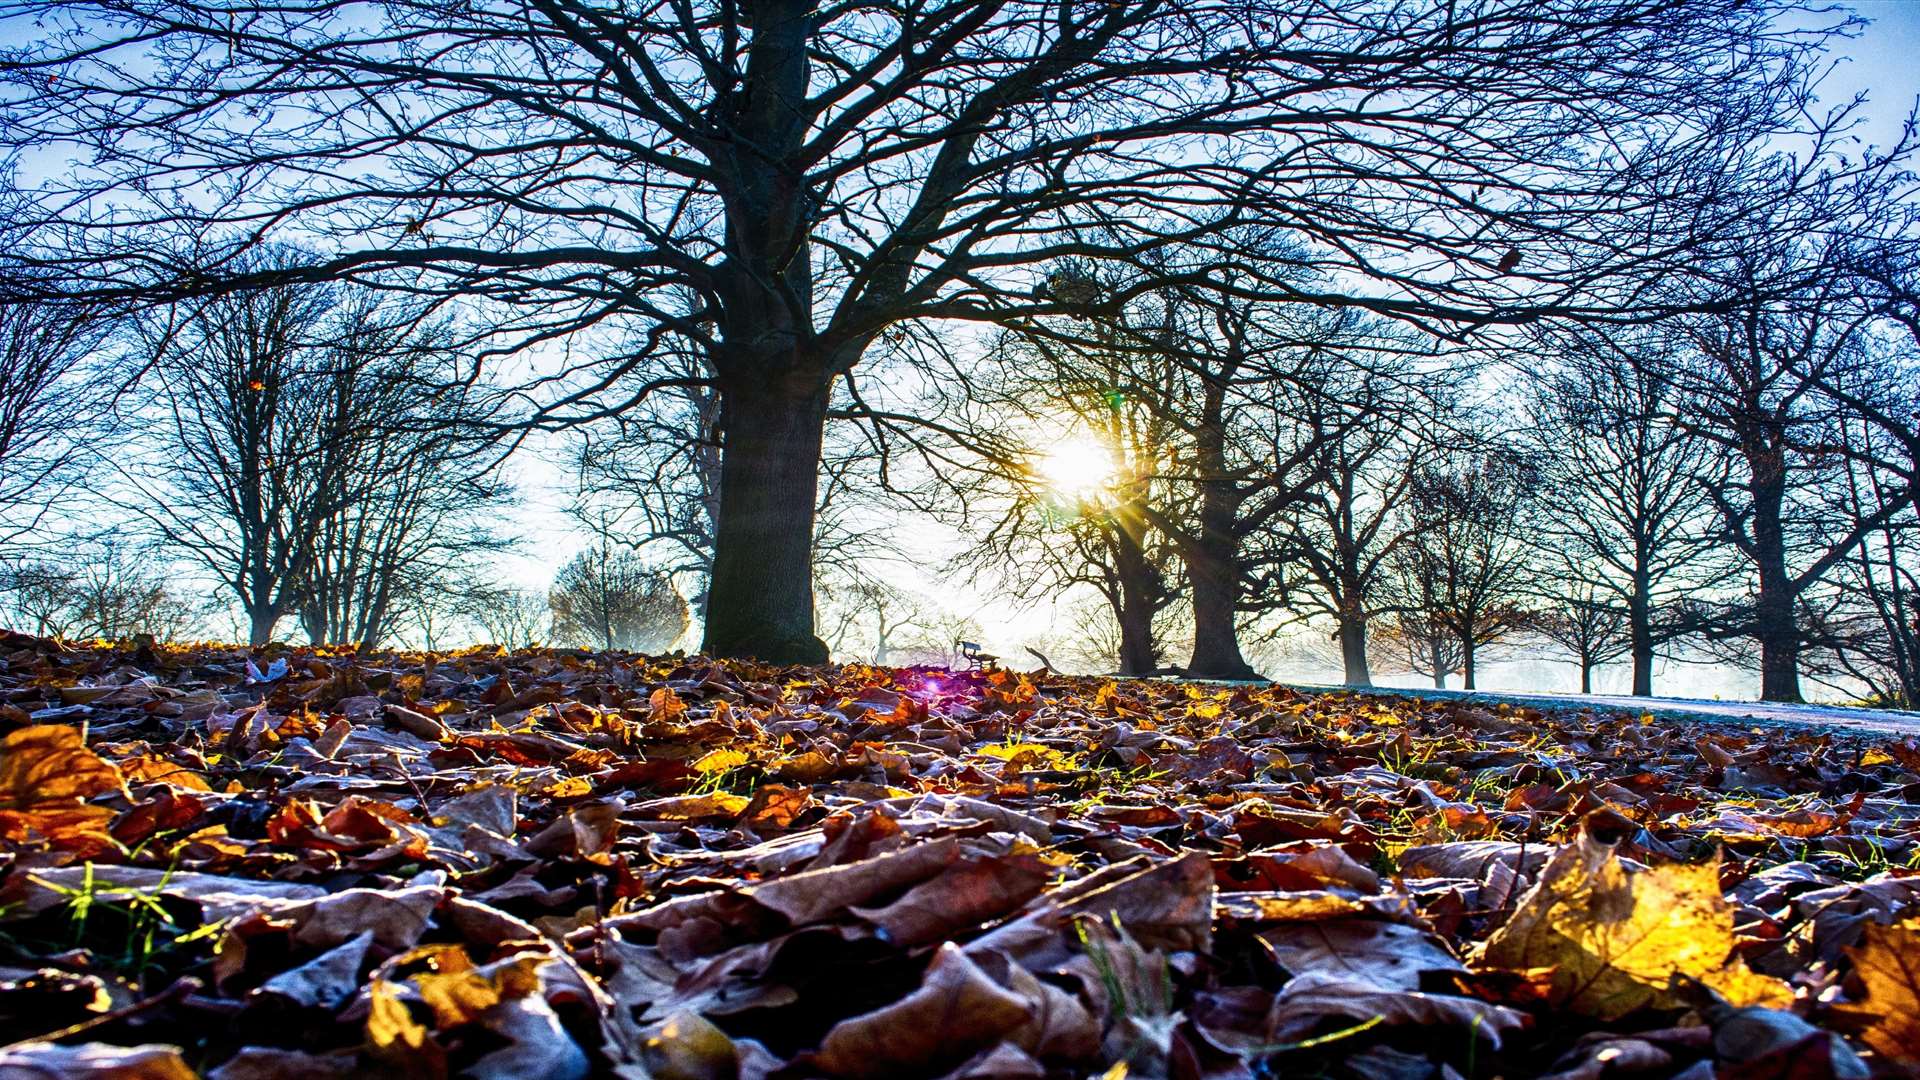 Roger Wilkins' picture won the Seasons category of the Mote Park photographic competition